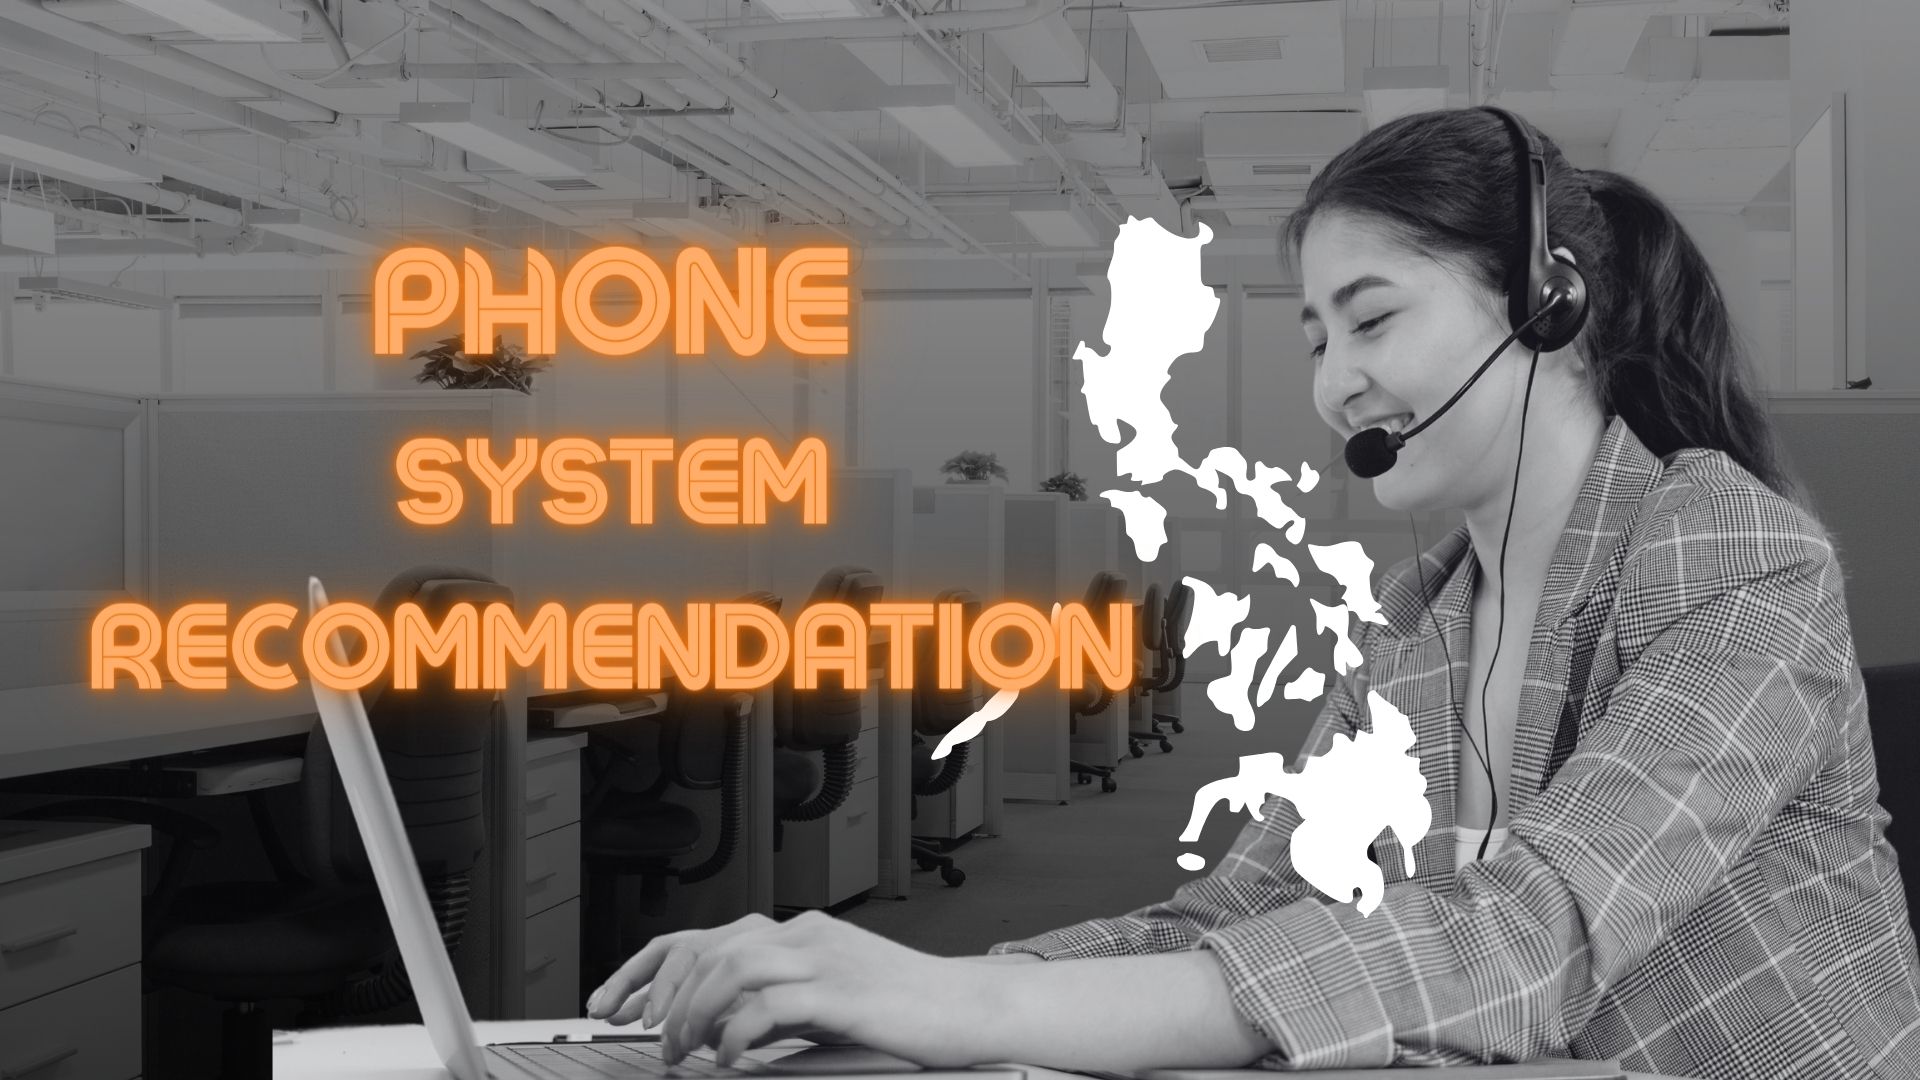 Phone system recommendation for use in customer service